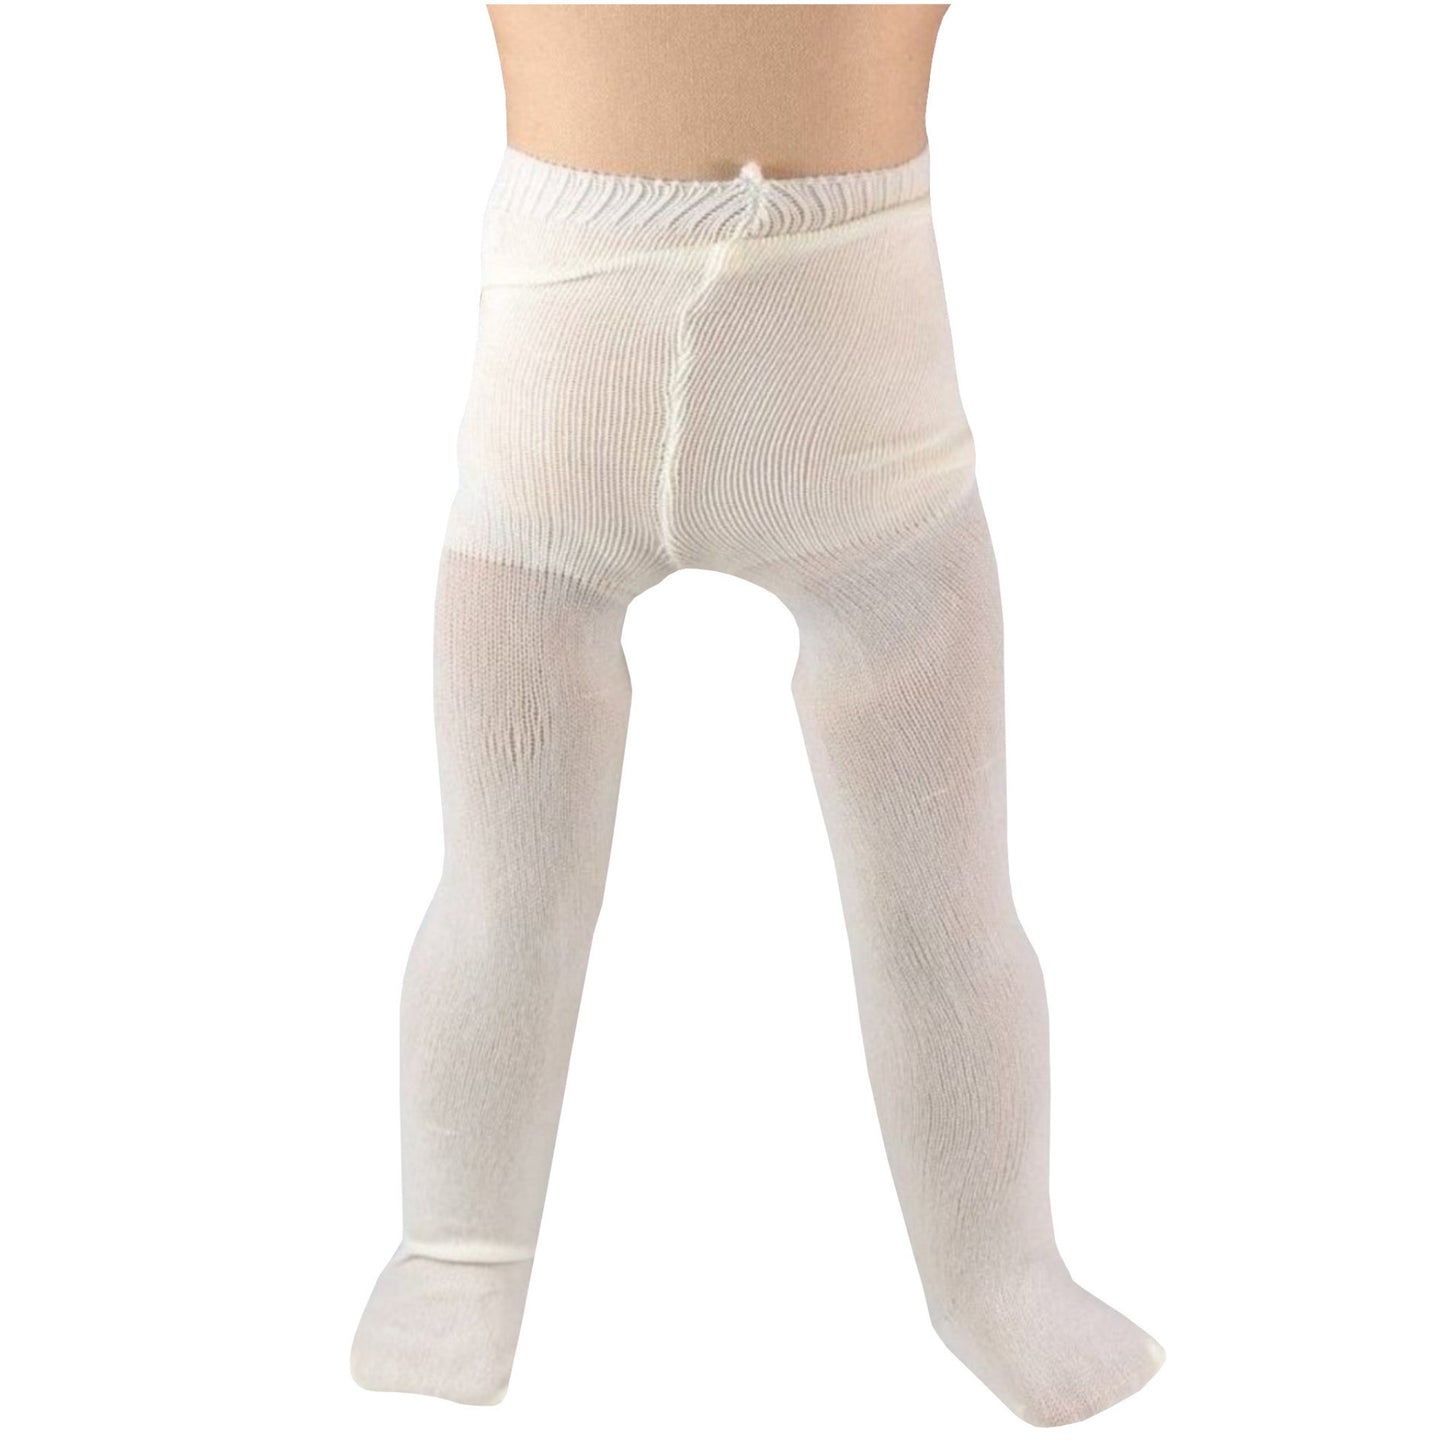 White Nylon Tights for 18-inch dolls with doll